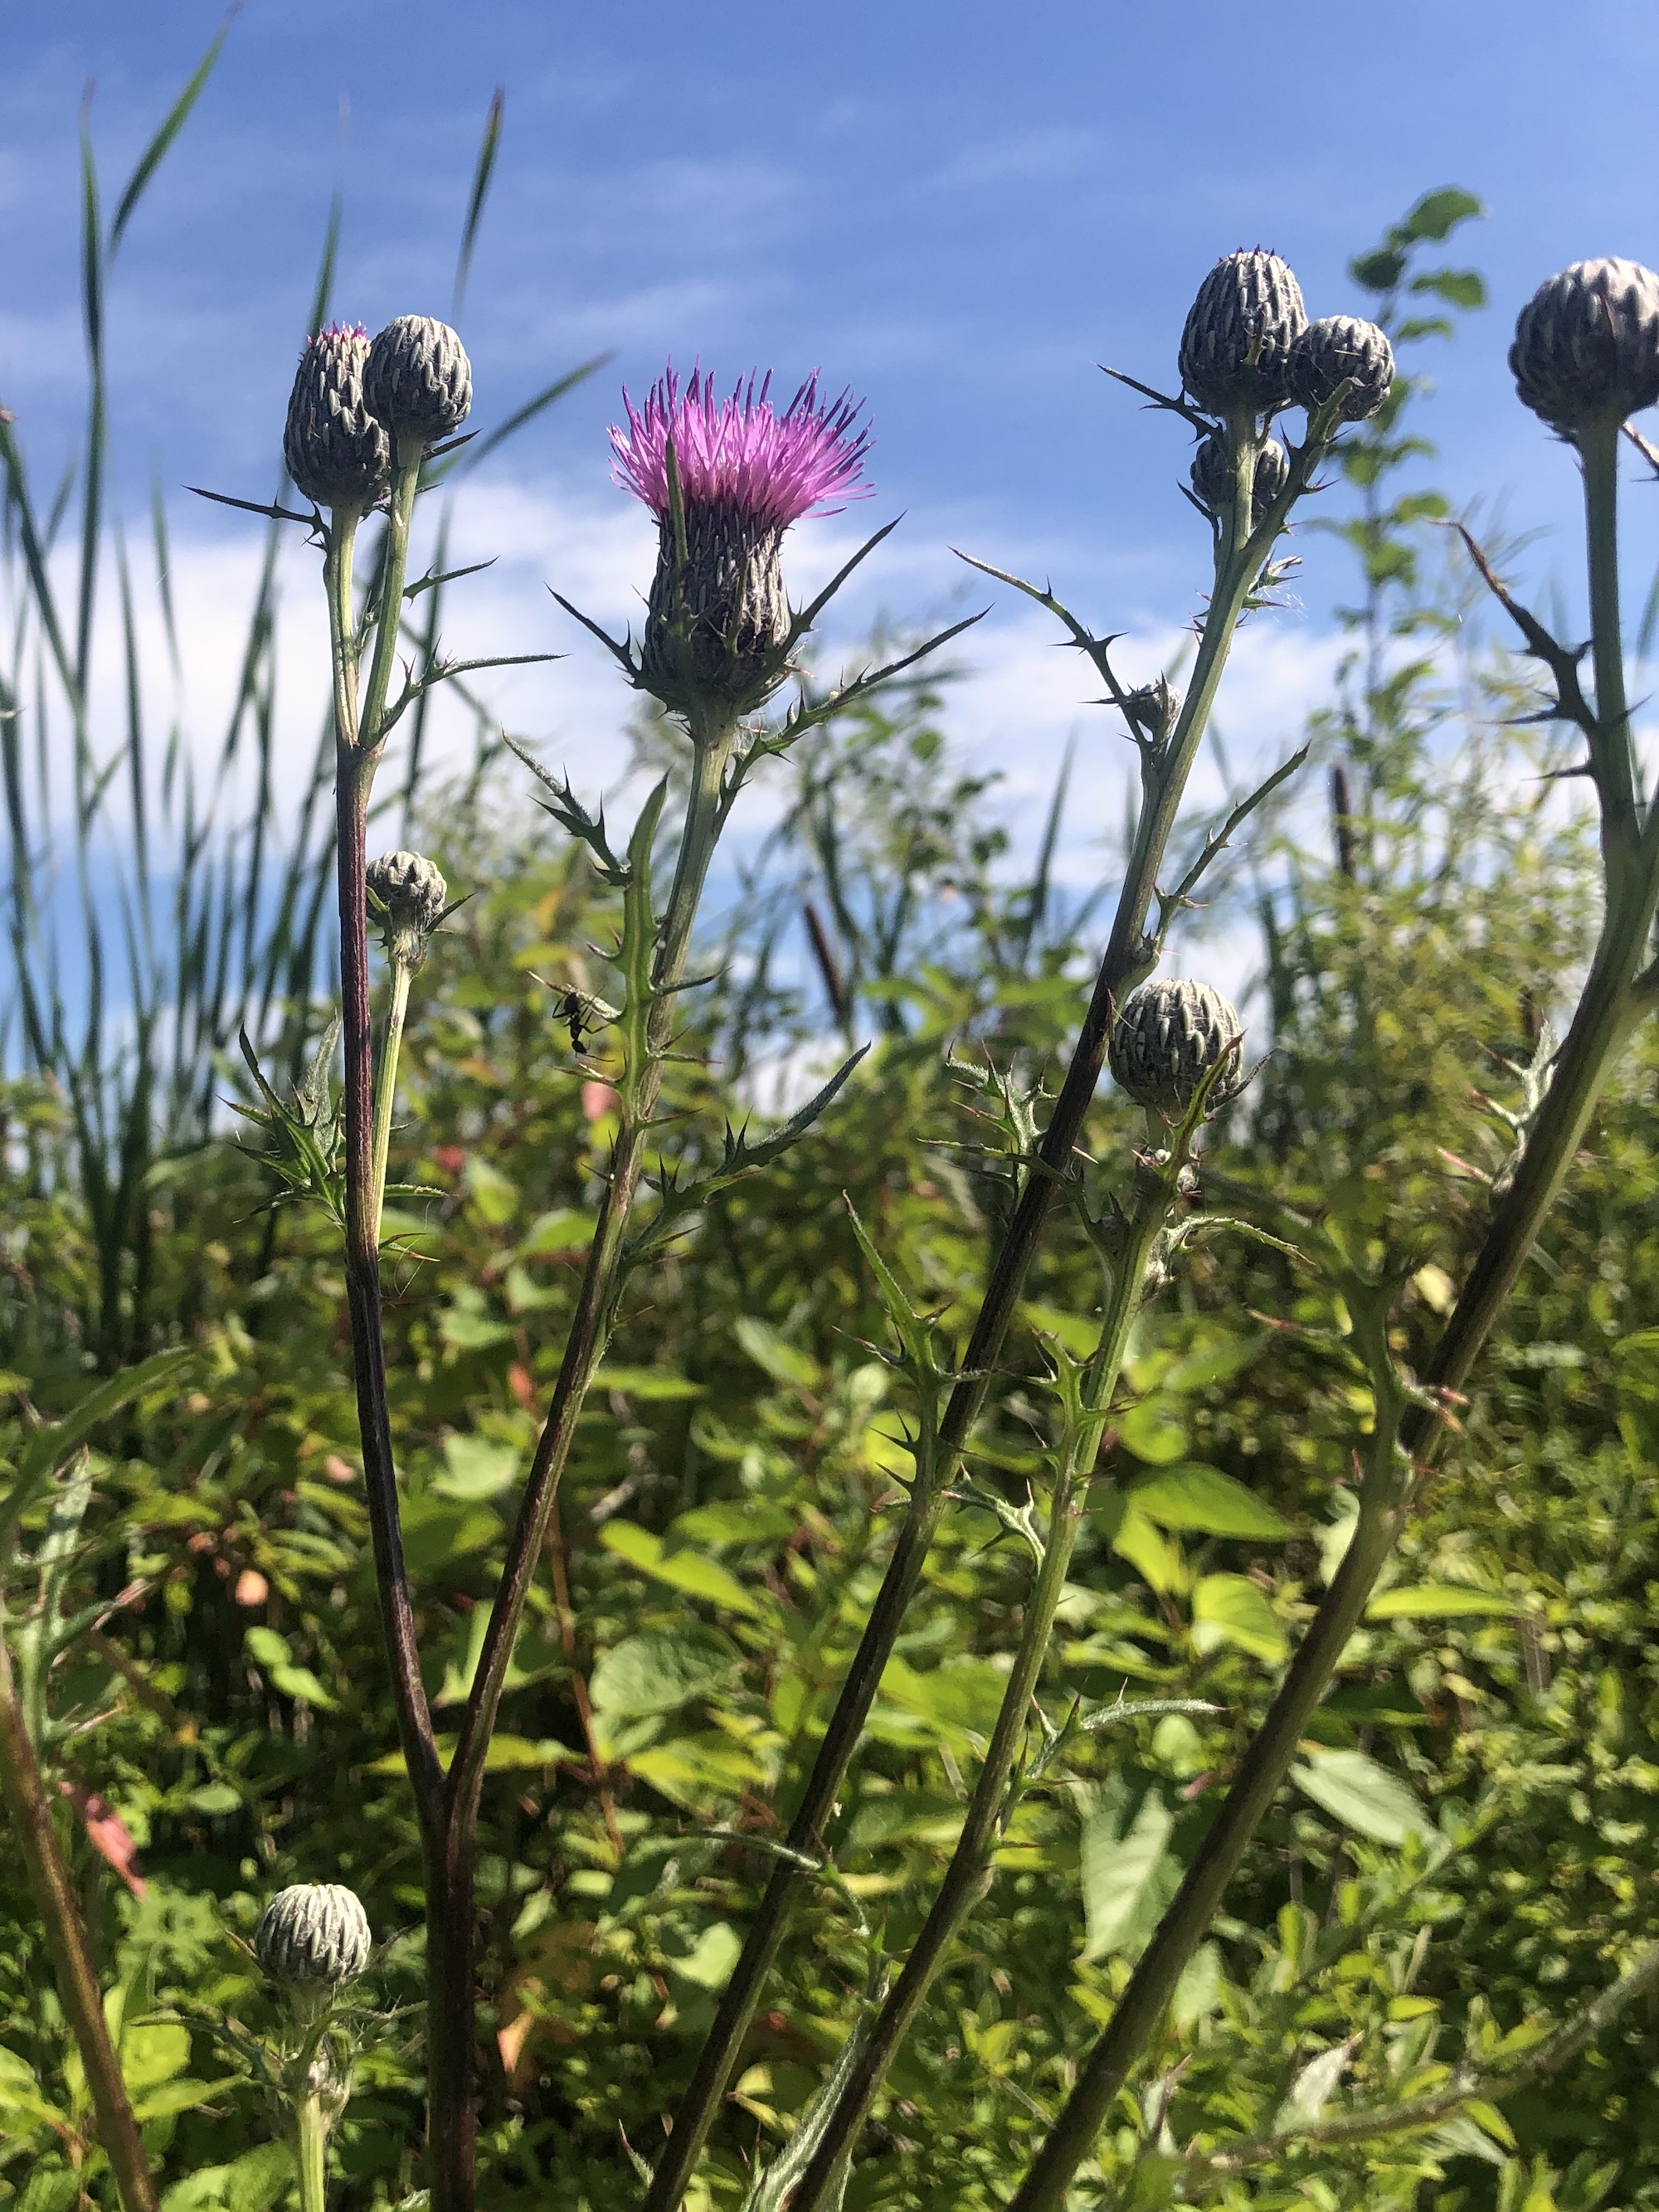 Swamp Thistle near cattails along shore of Lake Wingra along Arboretum Drive in Madison, Wisconsin on August 16, 2022.